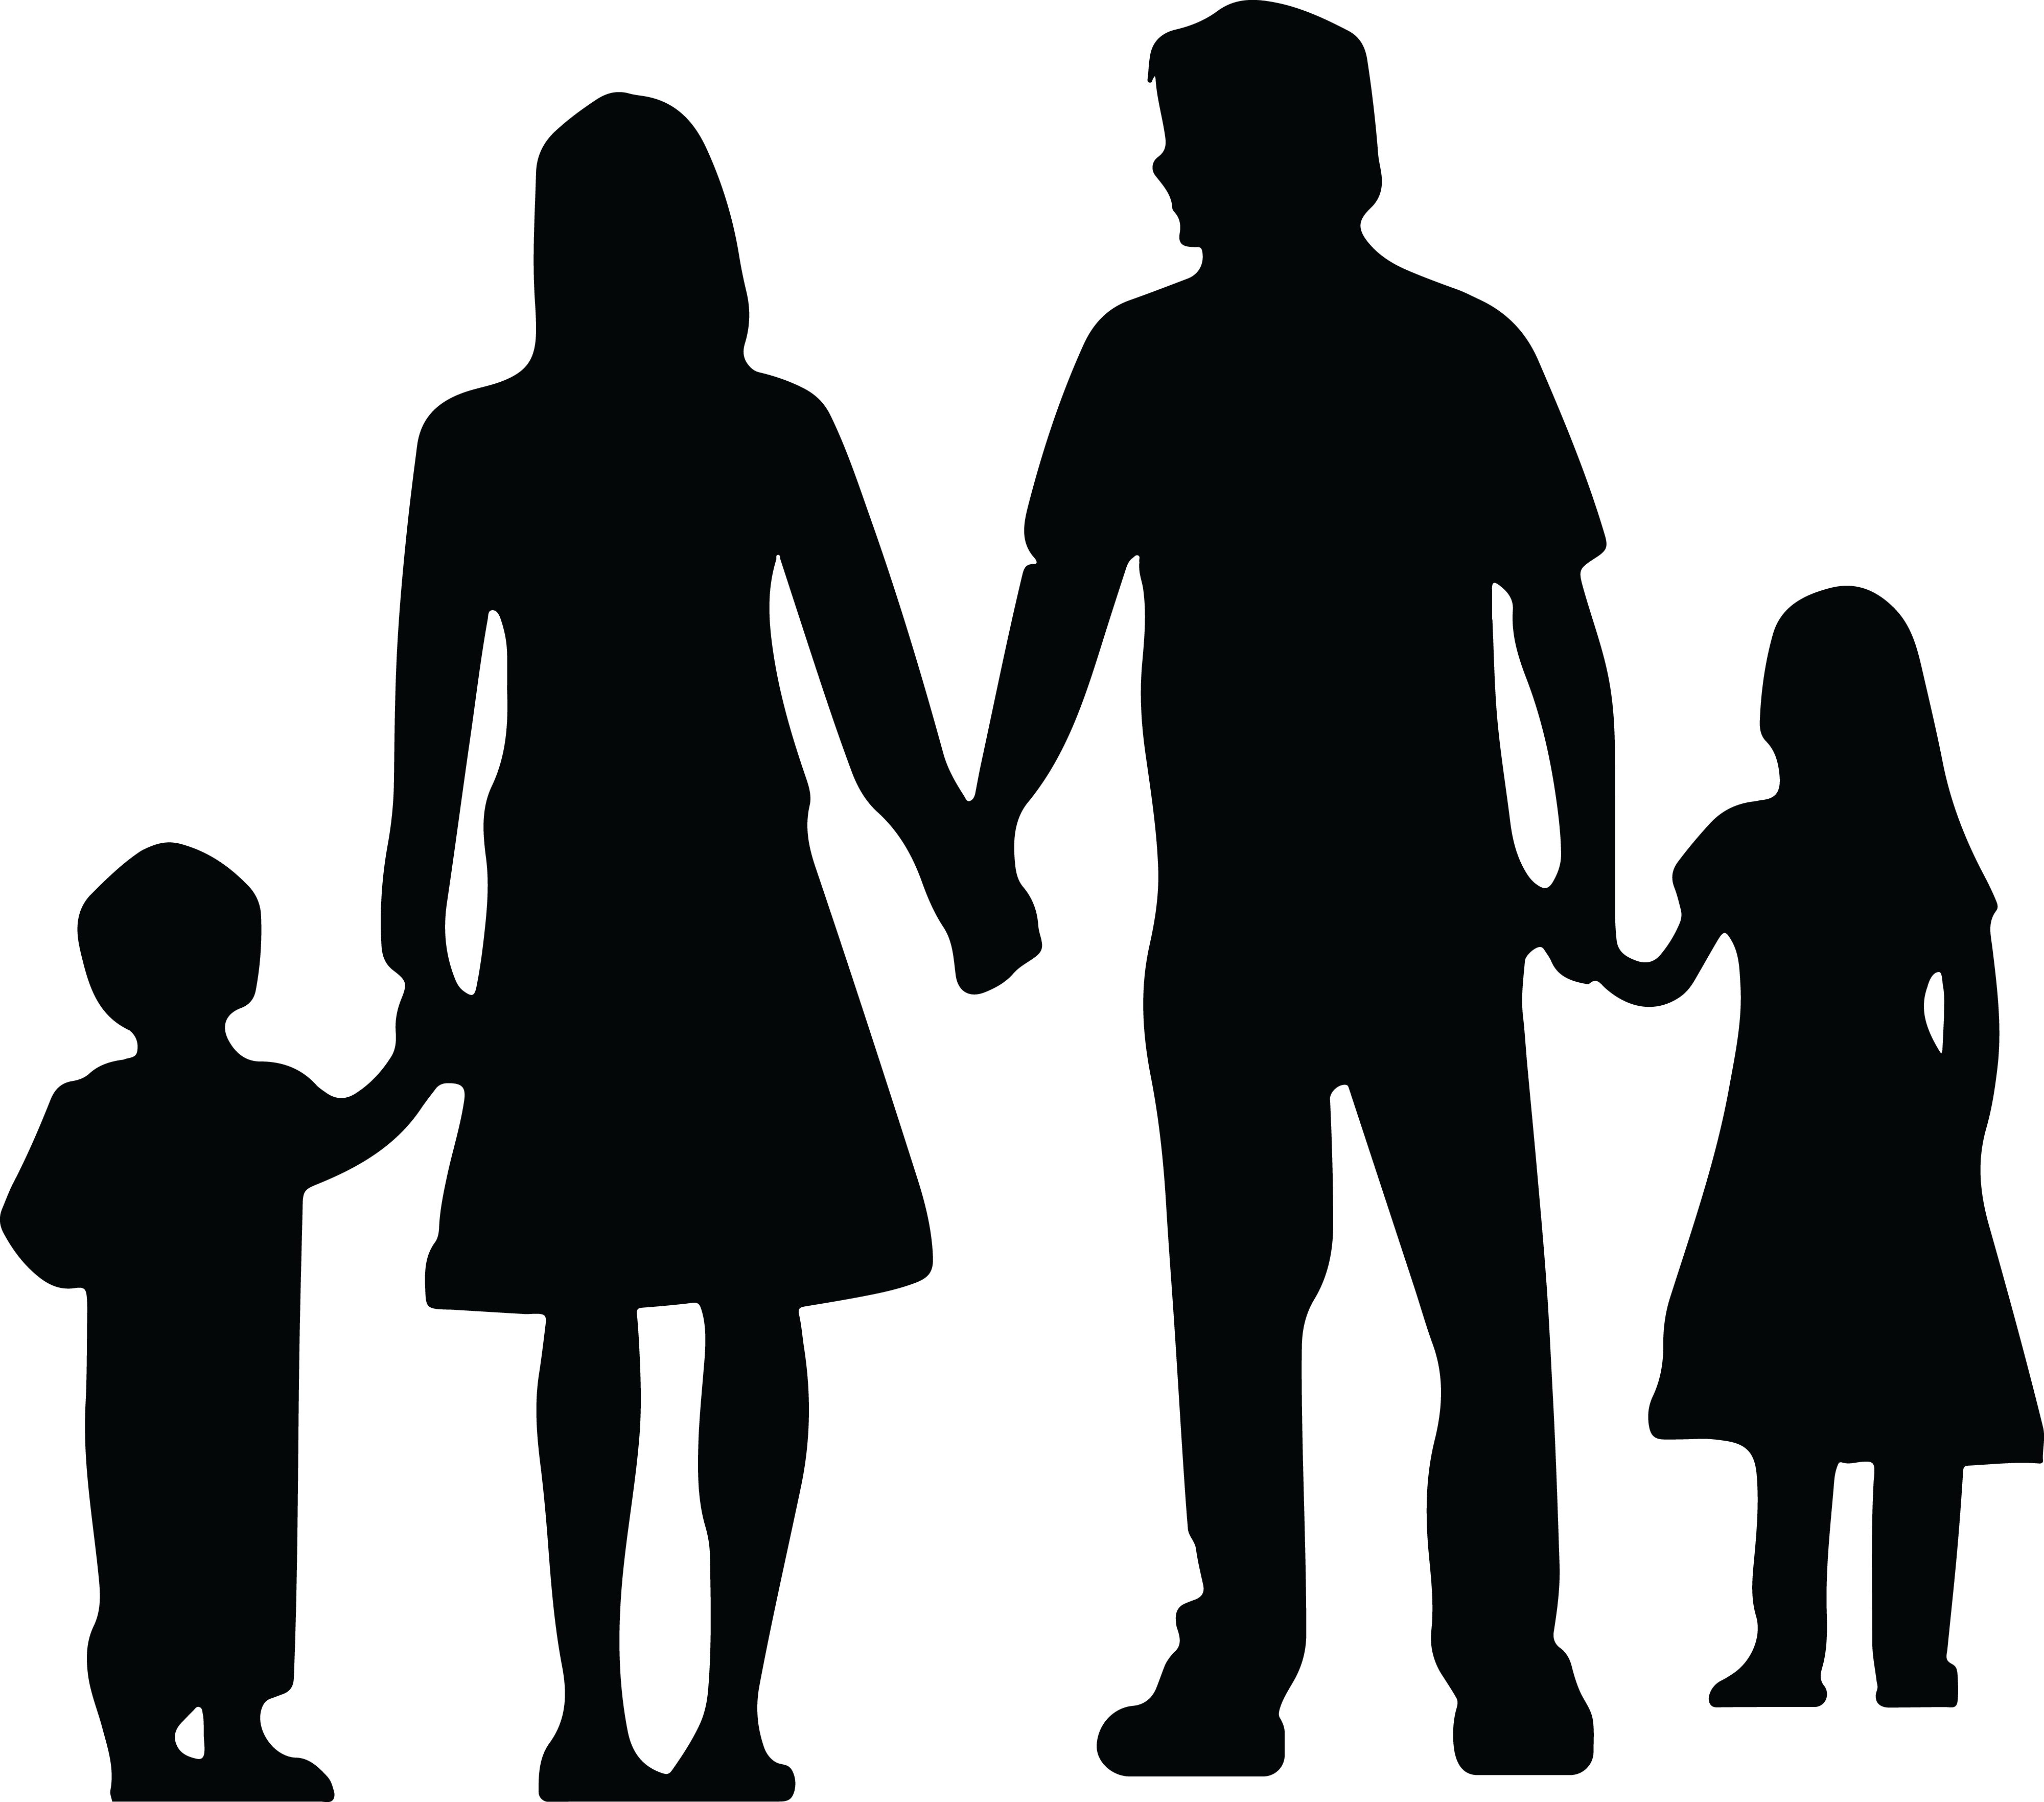 A Silhouette Of A Family Holding Hands